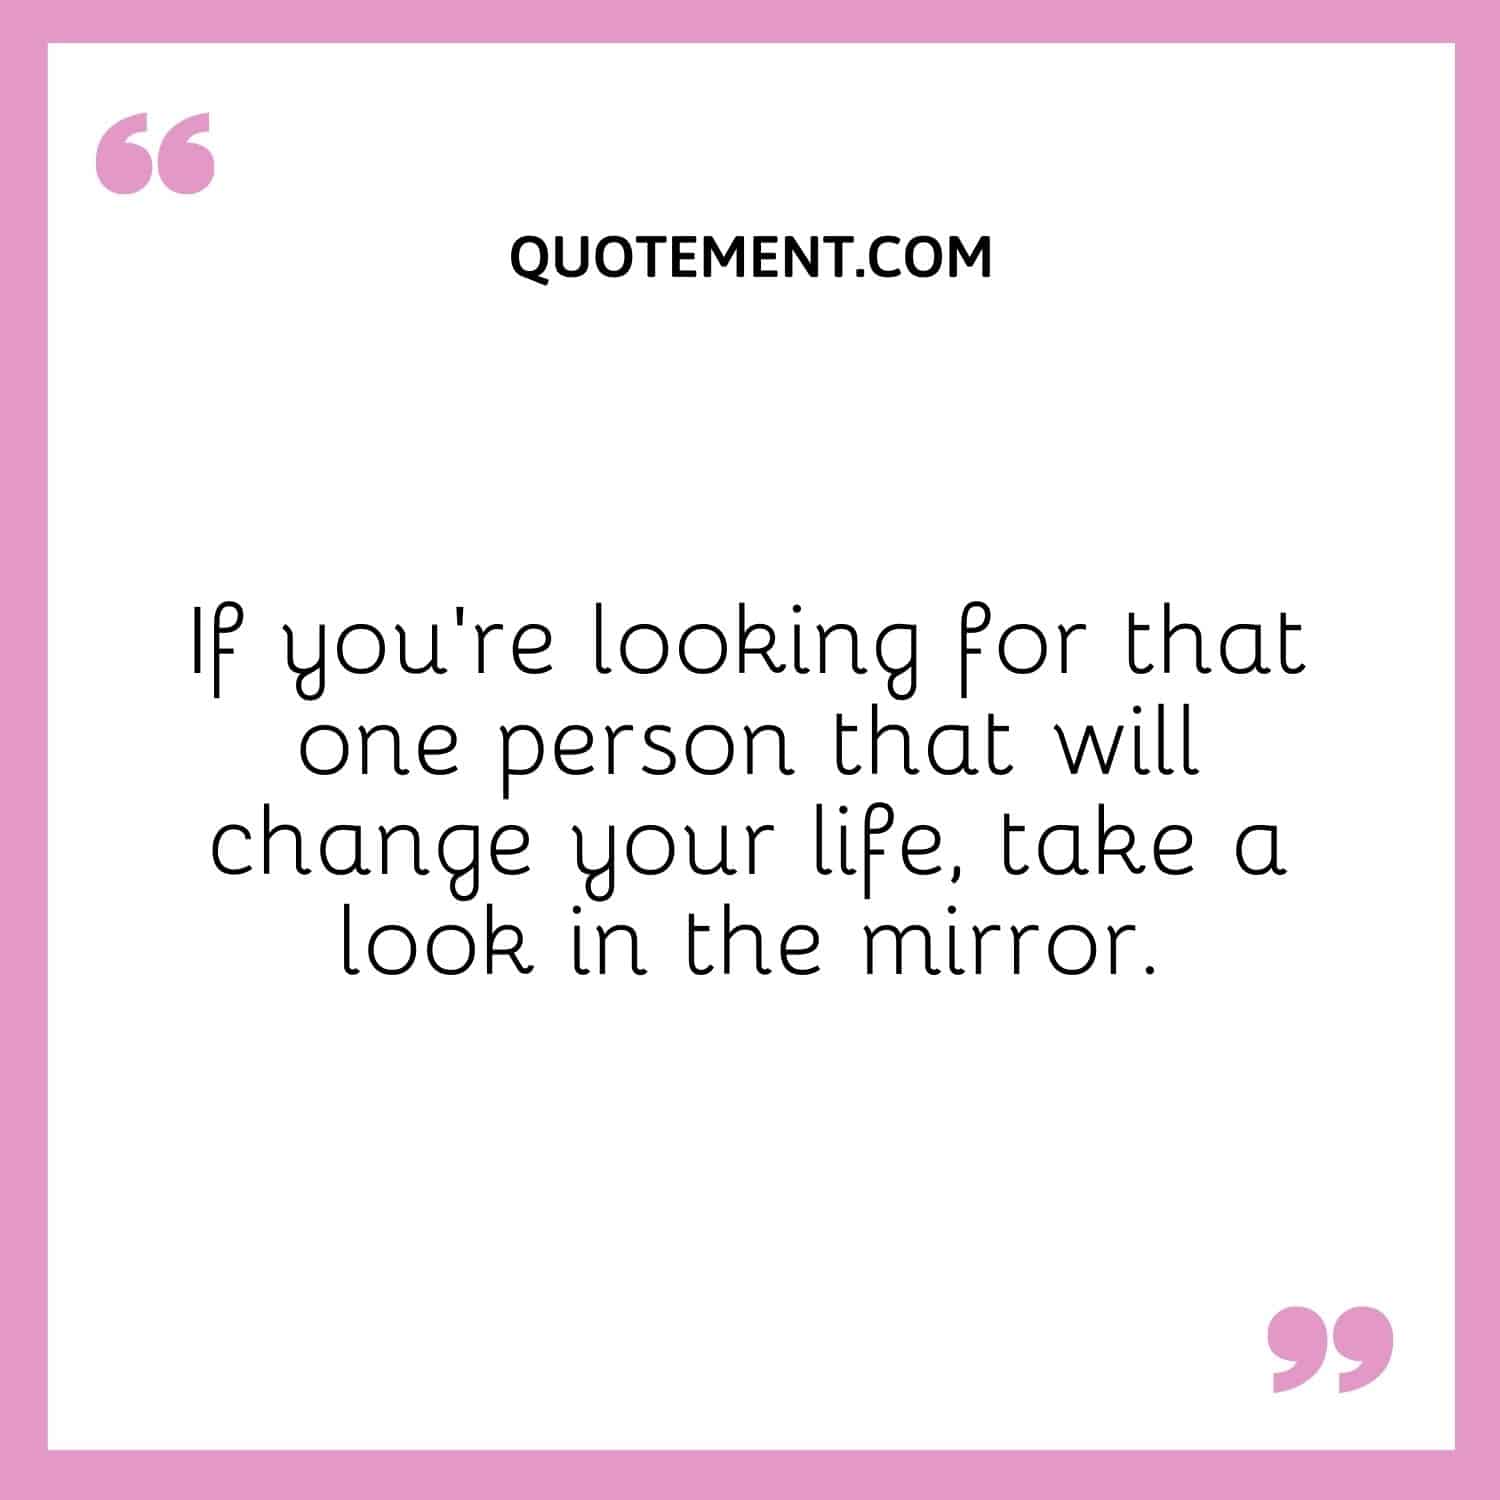 If you’re looking for that one person that will change your life, take a look in the mirror